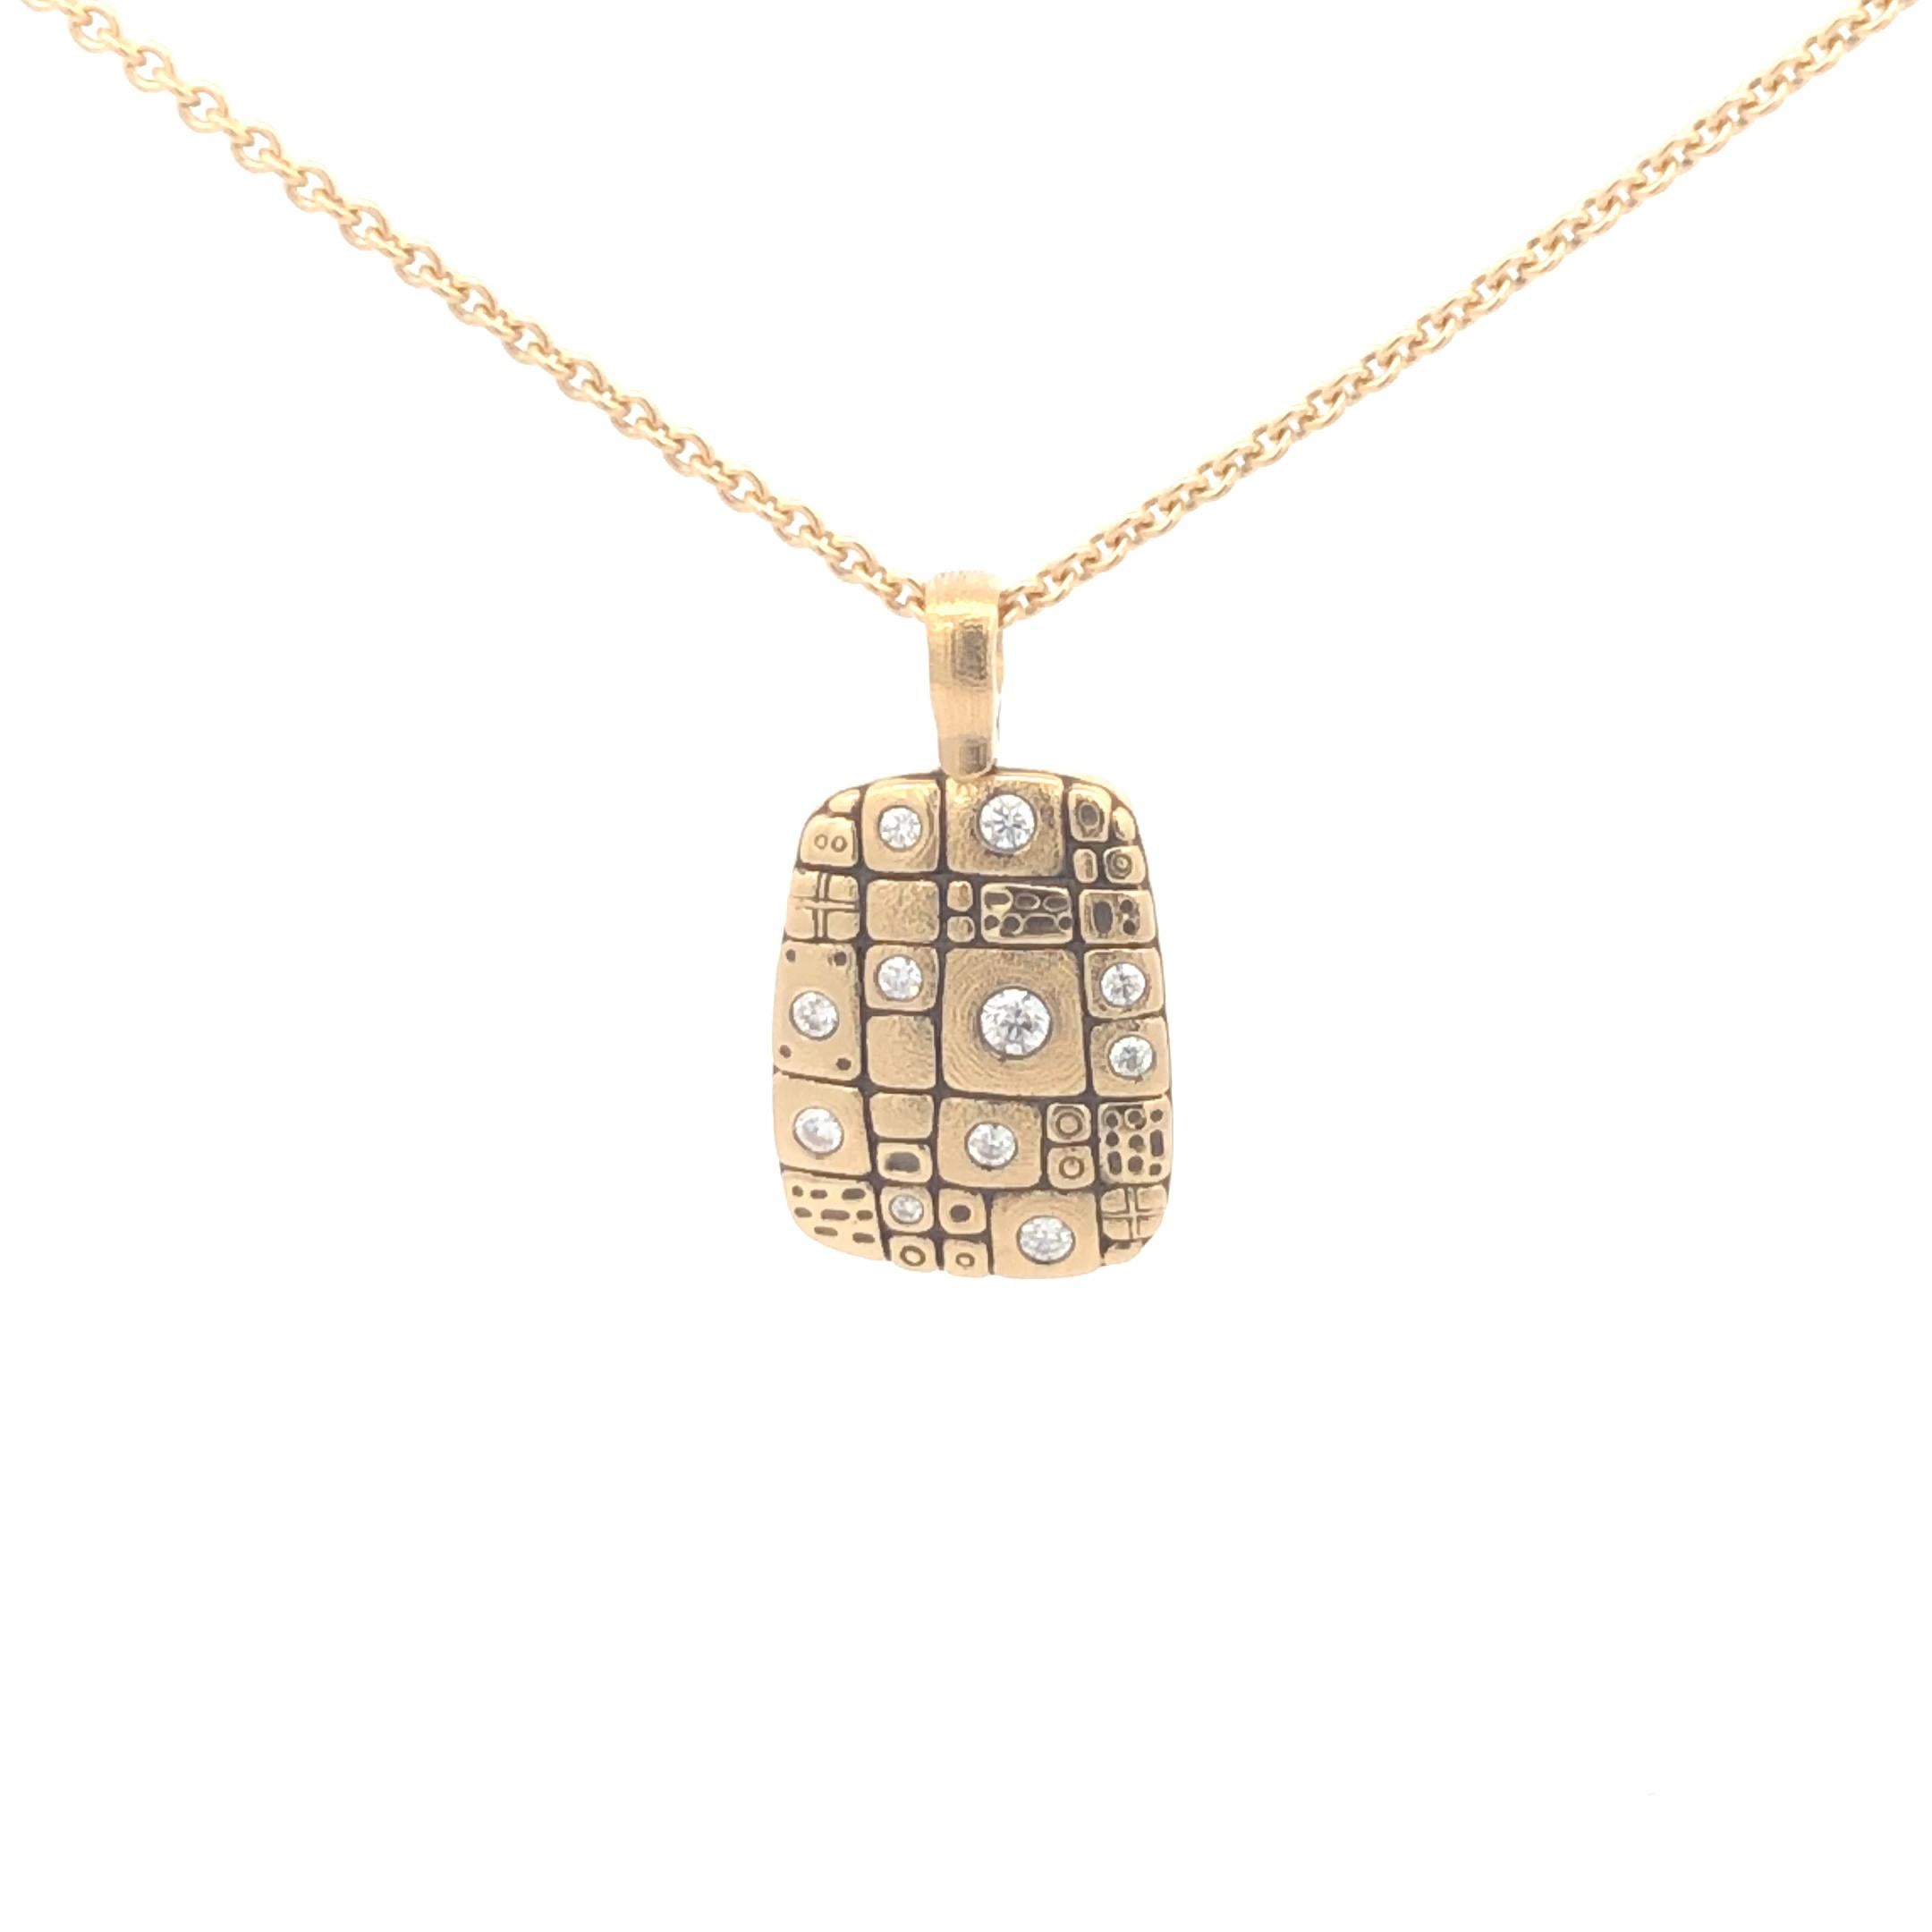 18K Yellow Gold and 11 0.34ctw Diamond 'Old Pathway' Pendant on a 1.9mm 18K Gold Chain